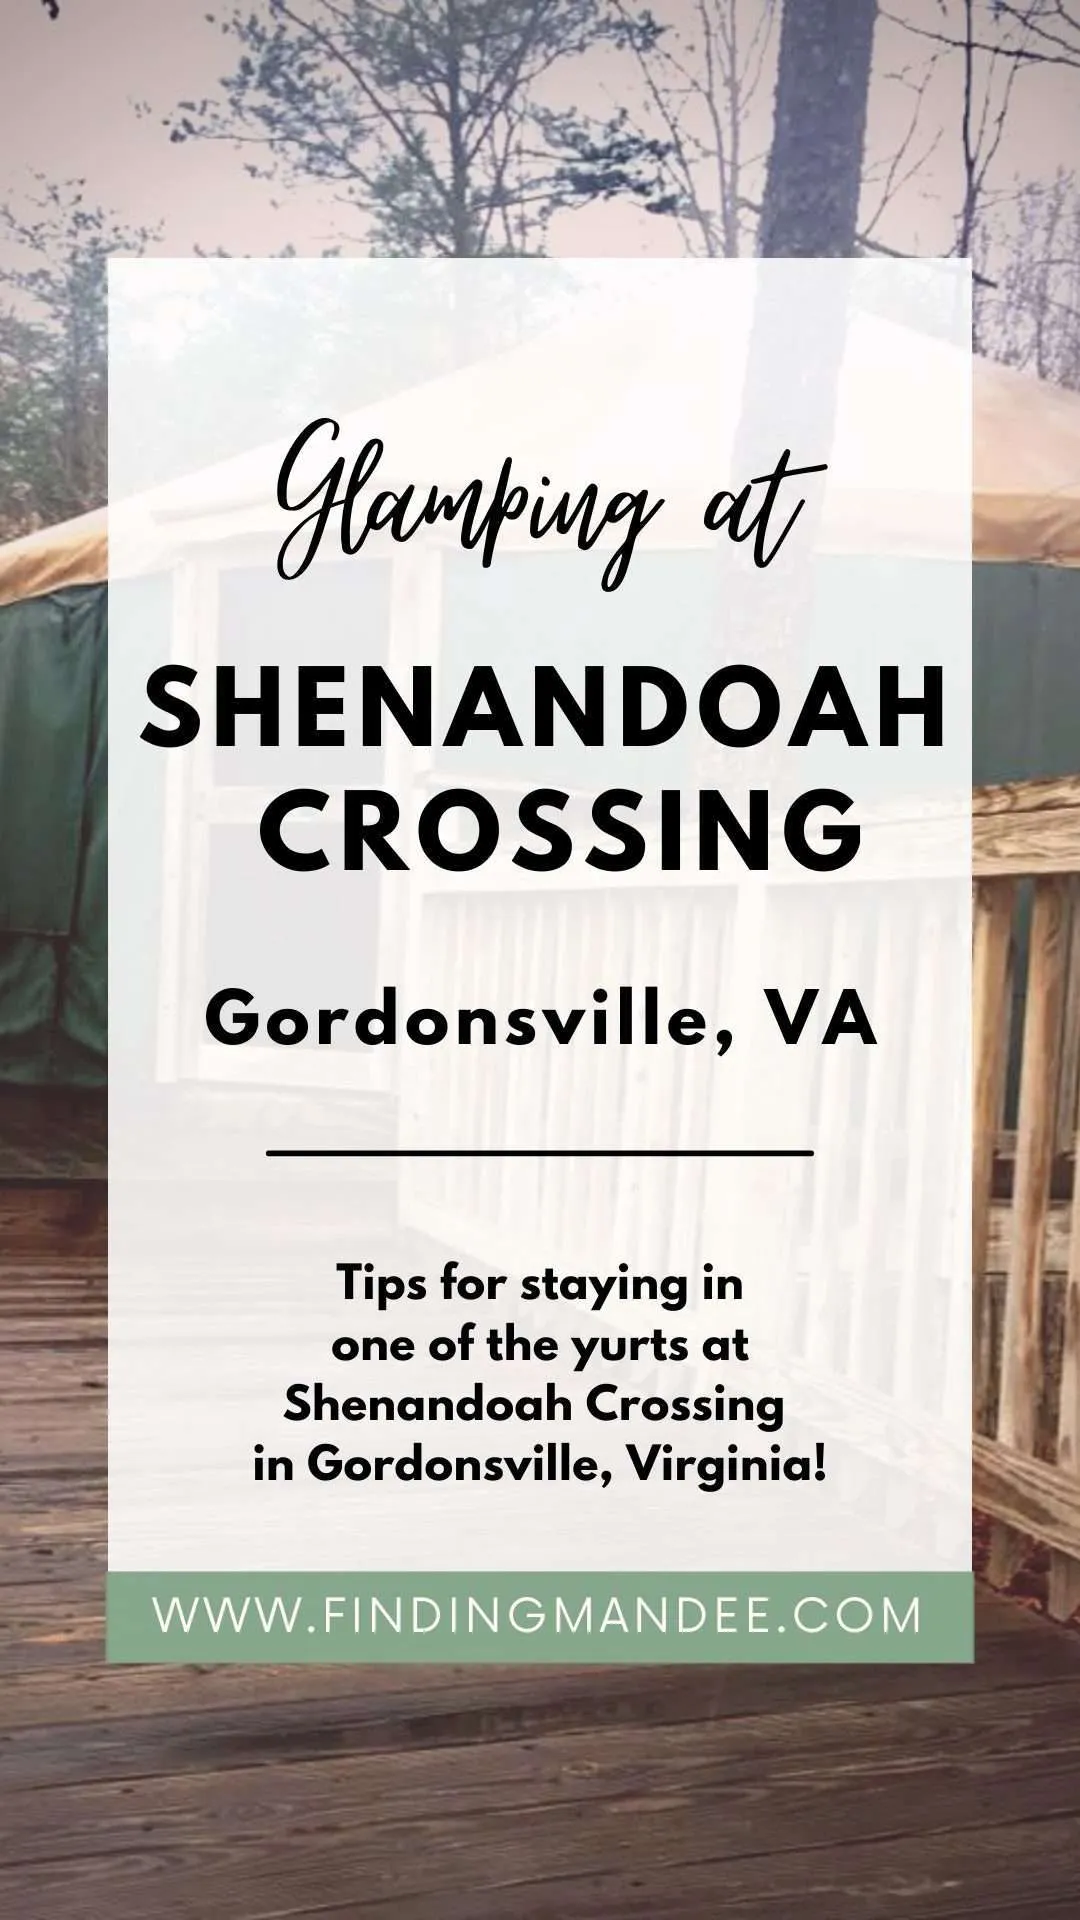 Glamping at Shenandoah Crossing in Gordonsville, VA: Tips for staying in one of the yurts. | Finding Mandee